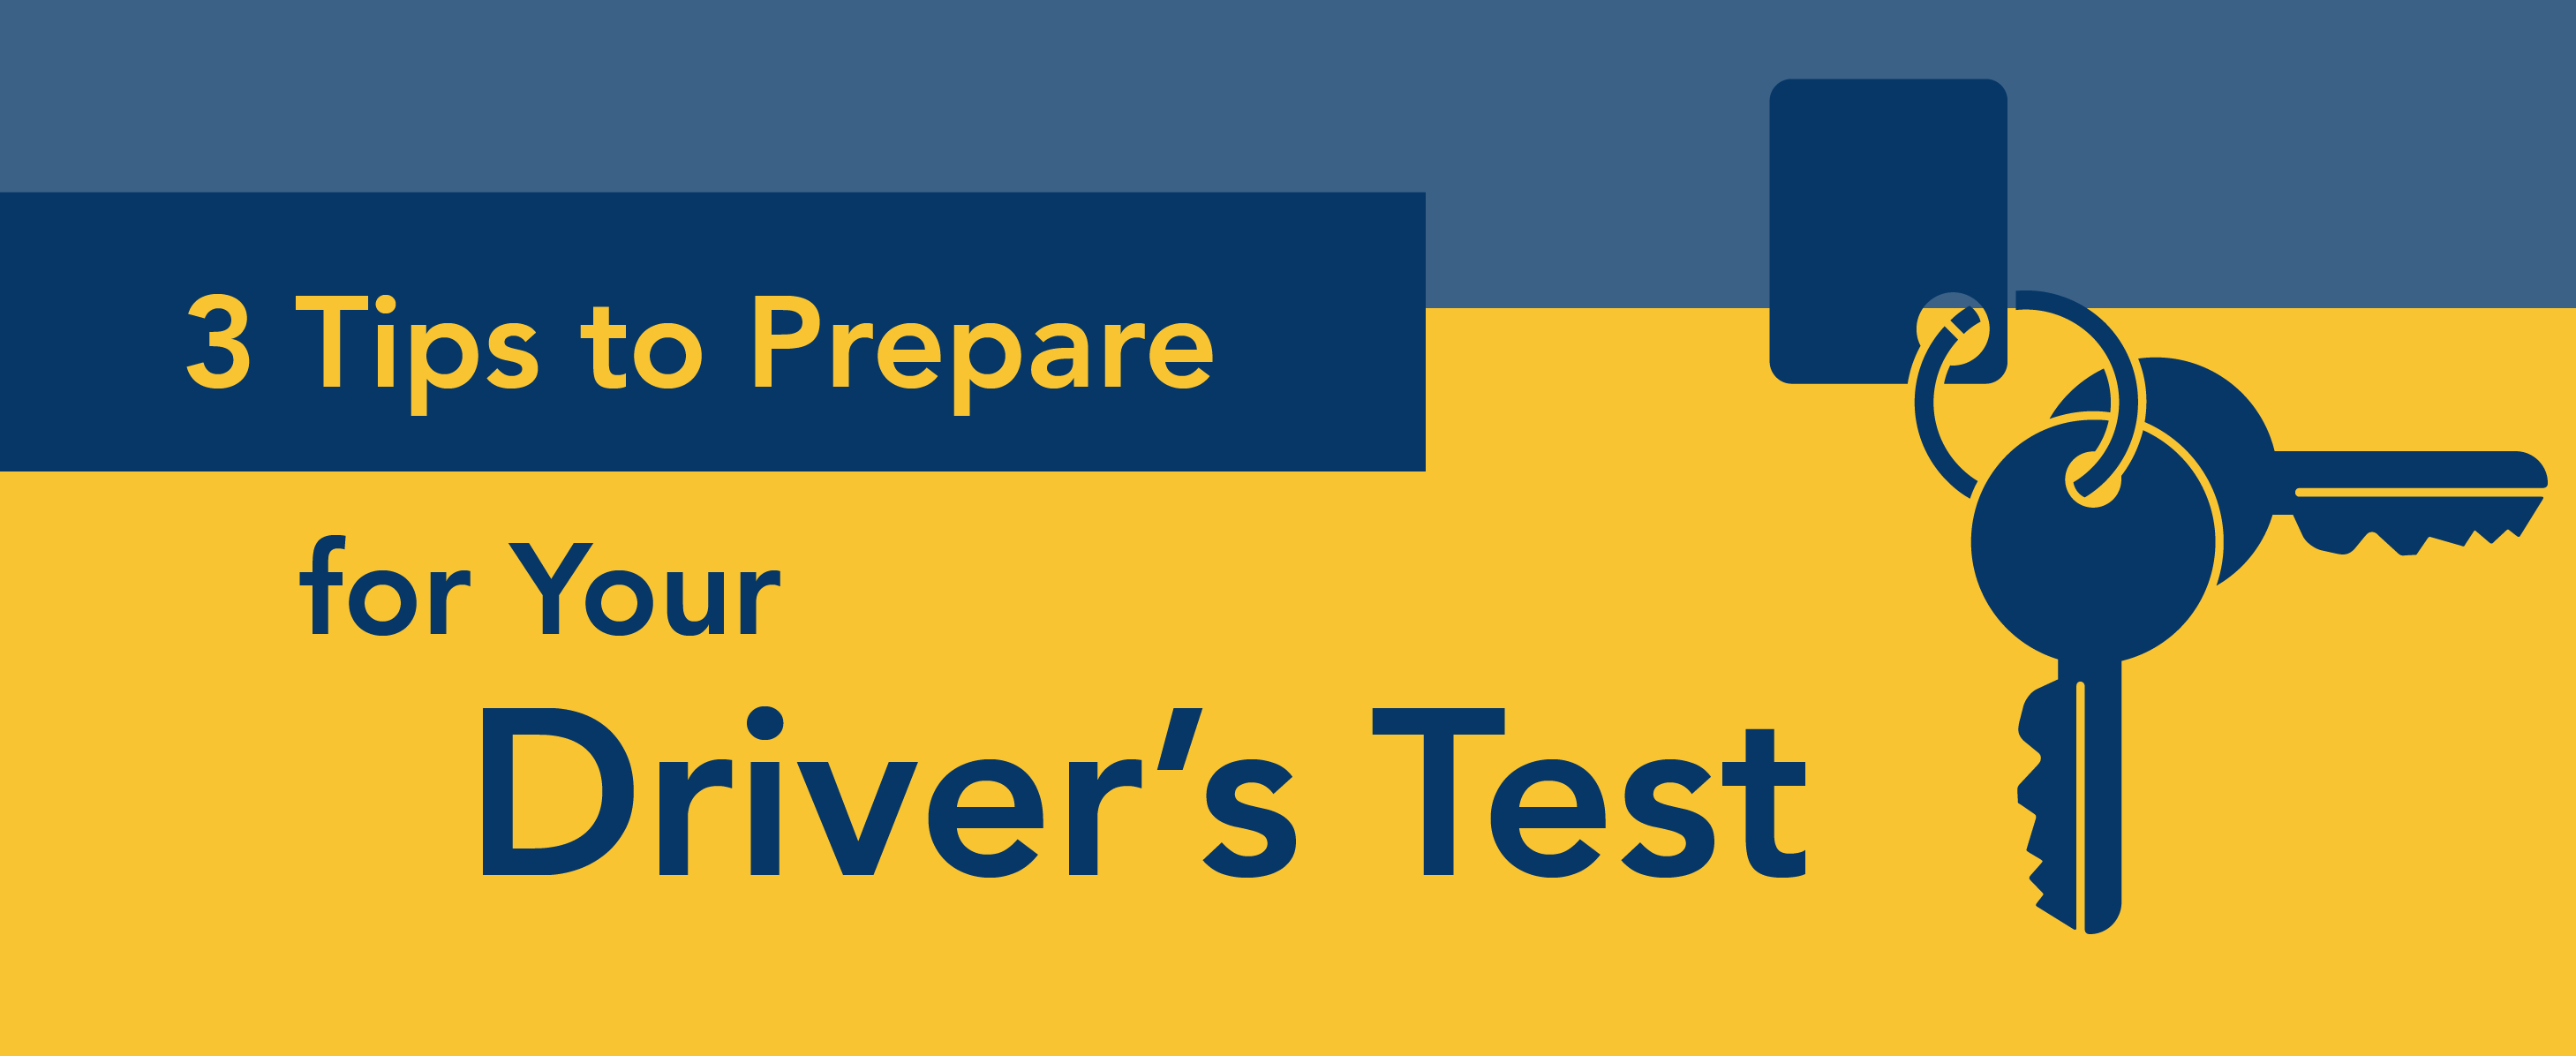 3 tips to prepare for your driver's test